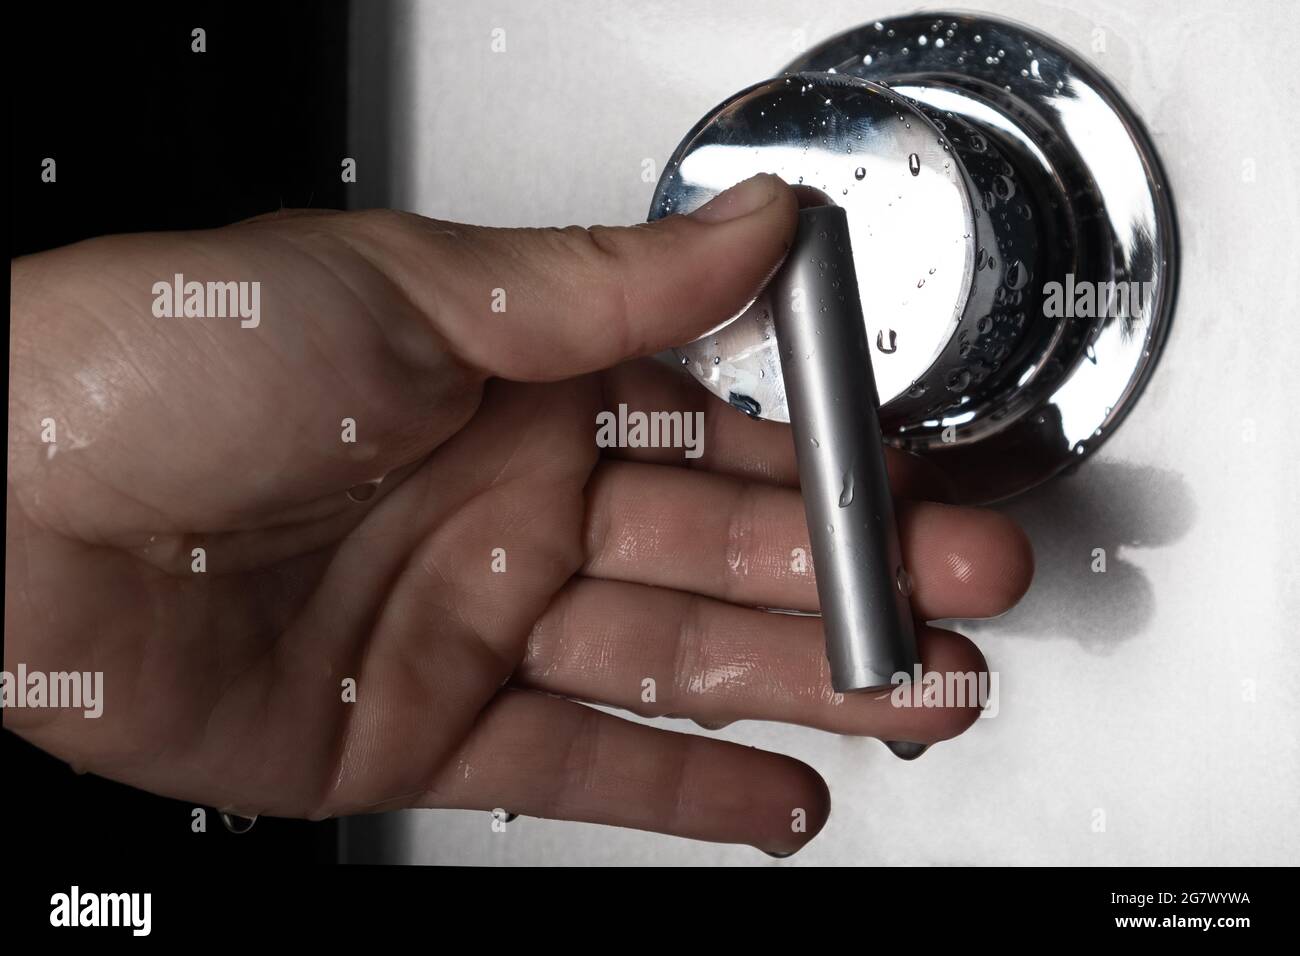 hand switches shower mixer for switching between hot and cold water. Stock Photo